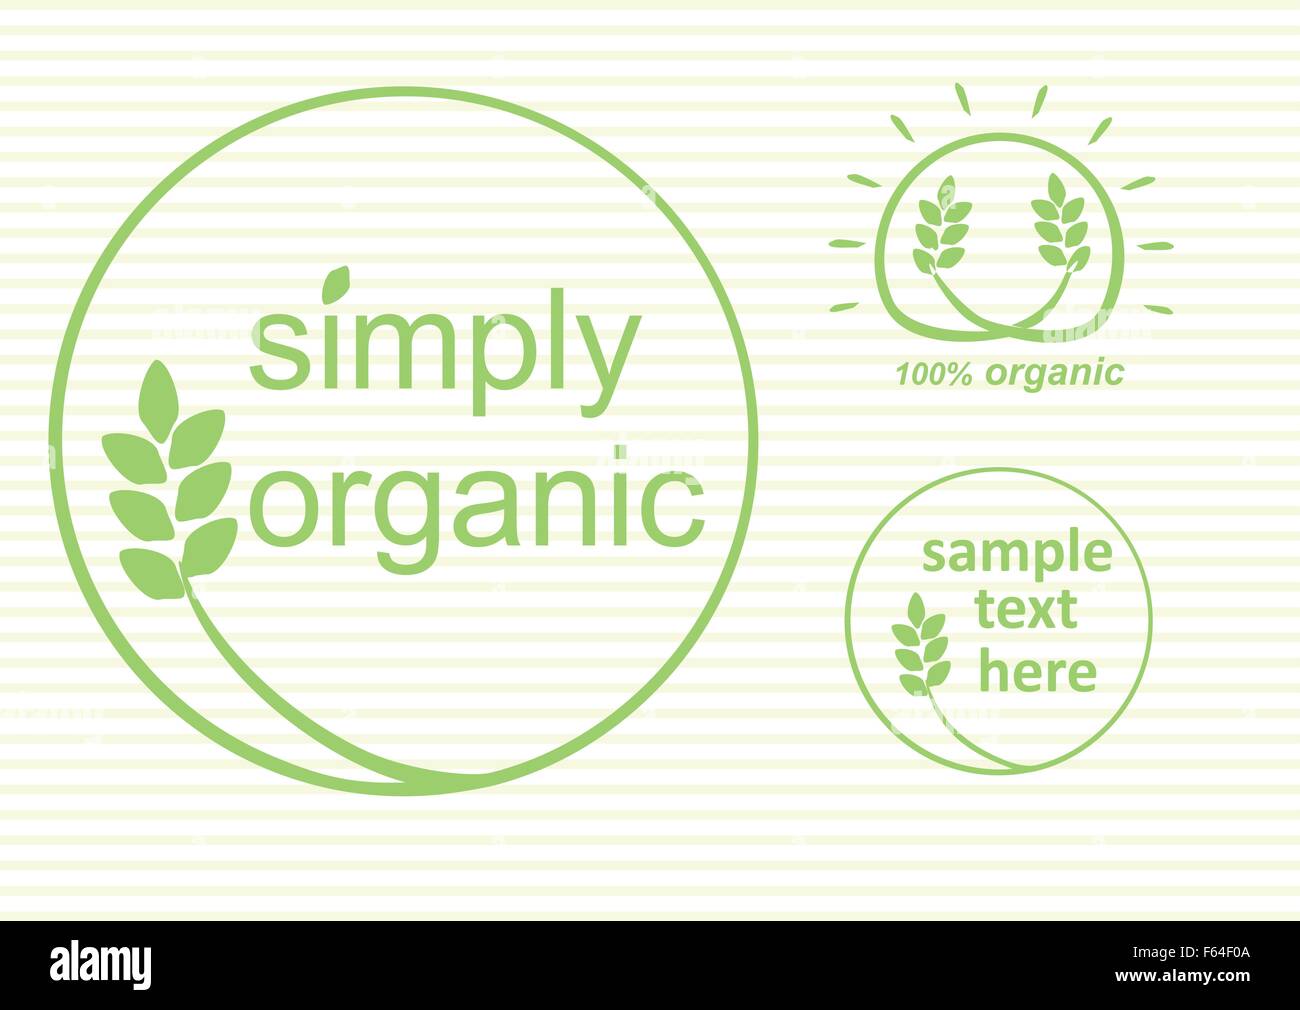 https://c8.alamy.com/comp/F64F0A/simply-organic-vector-label-logo-or-sticker-for-products-in-green-F64F0A.jpg